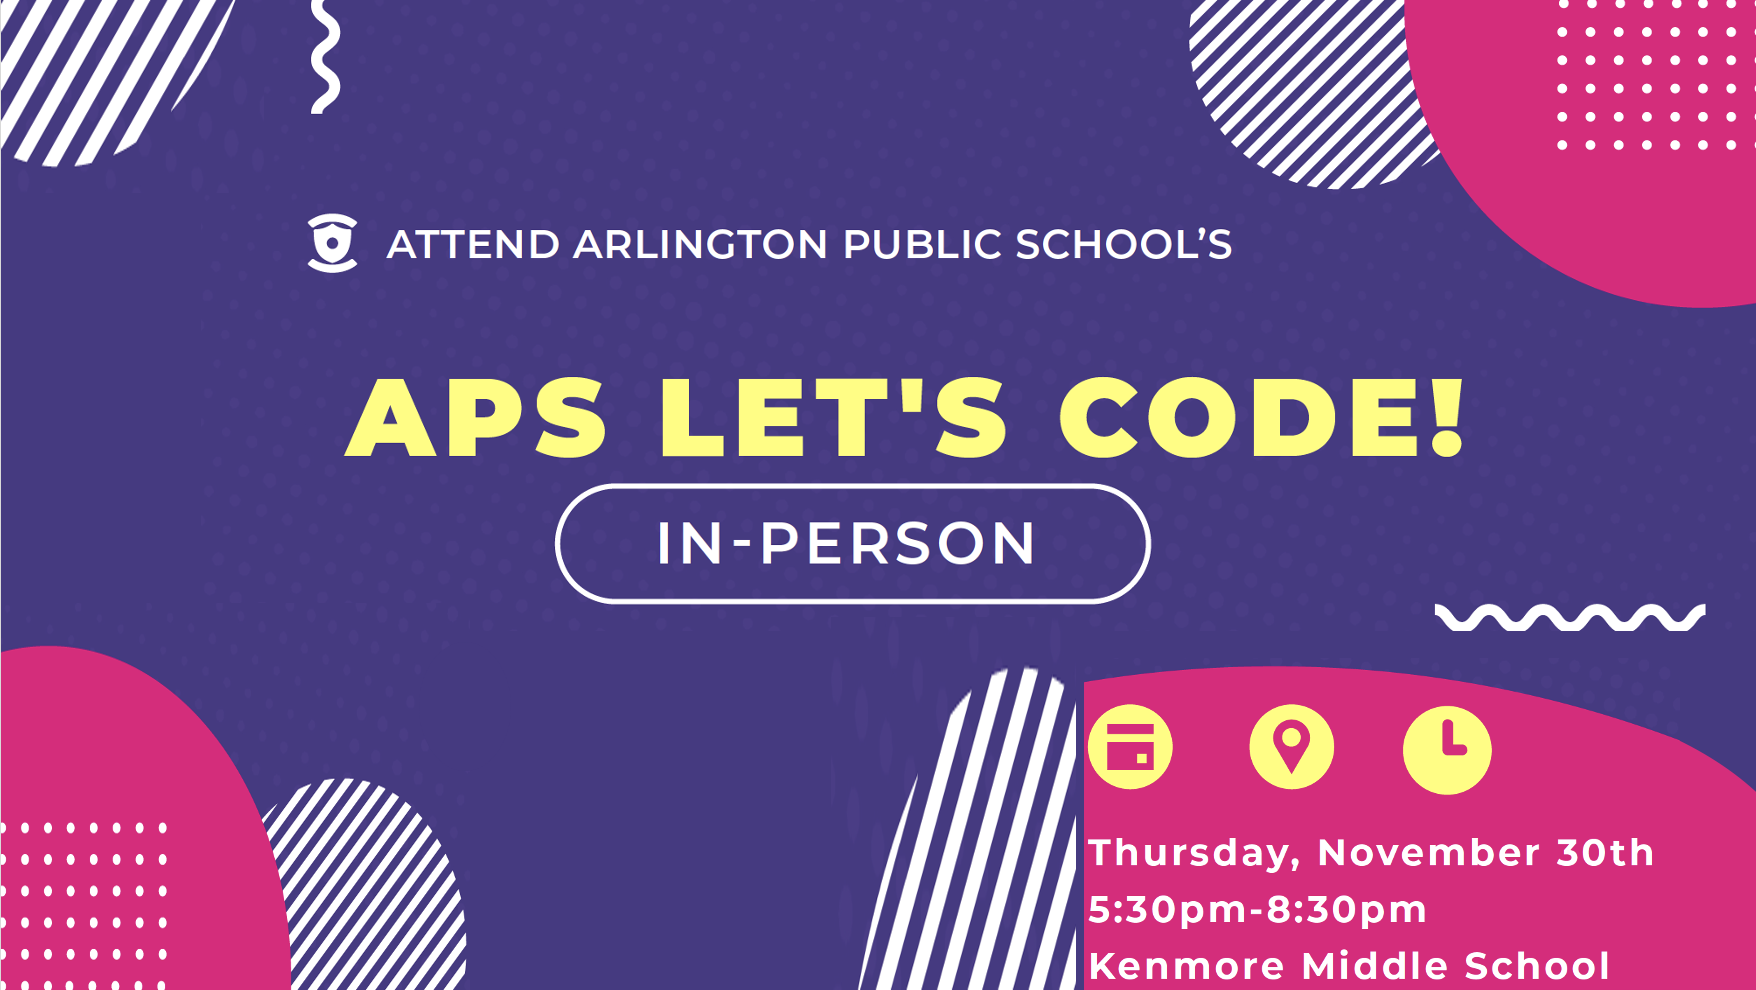 APS Let's Code 23-24 flyer in person Thursday, November 30 5:30-8:30pm Kenmore Middle School